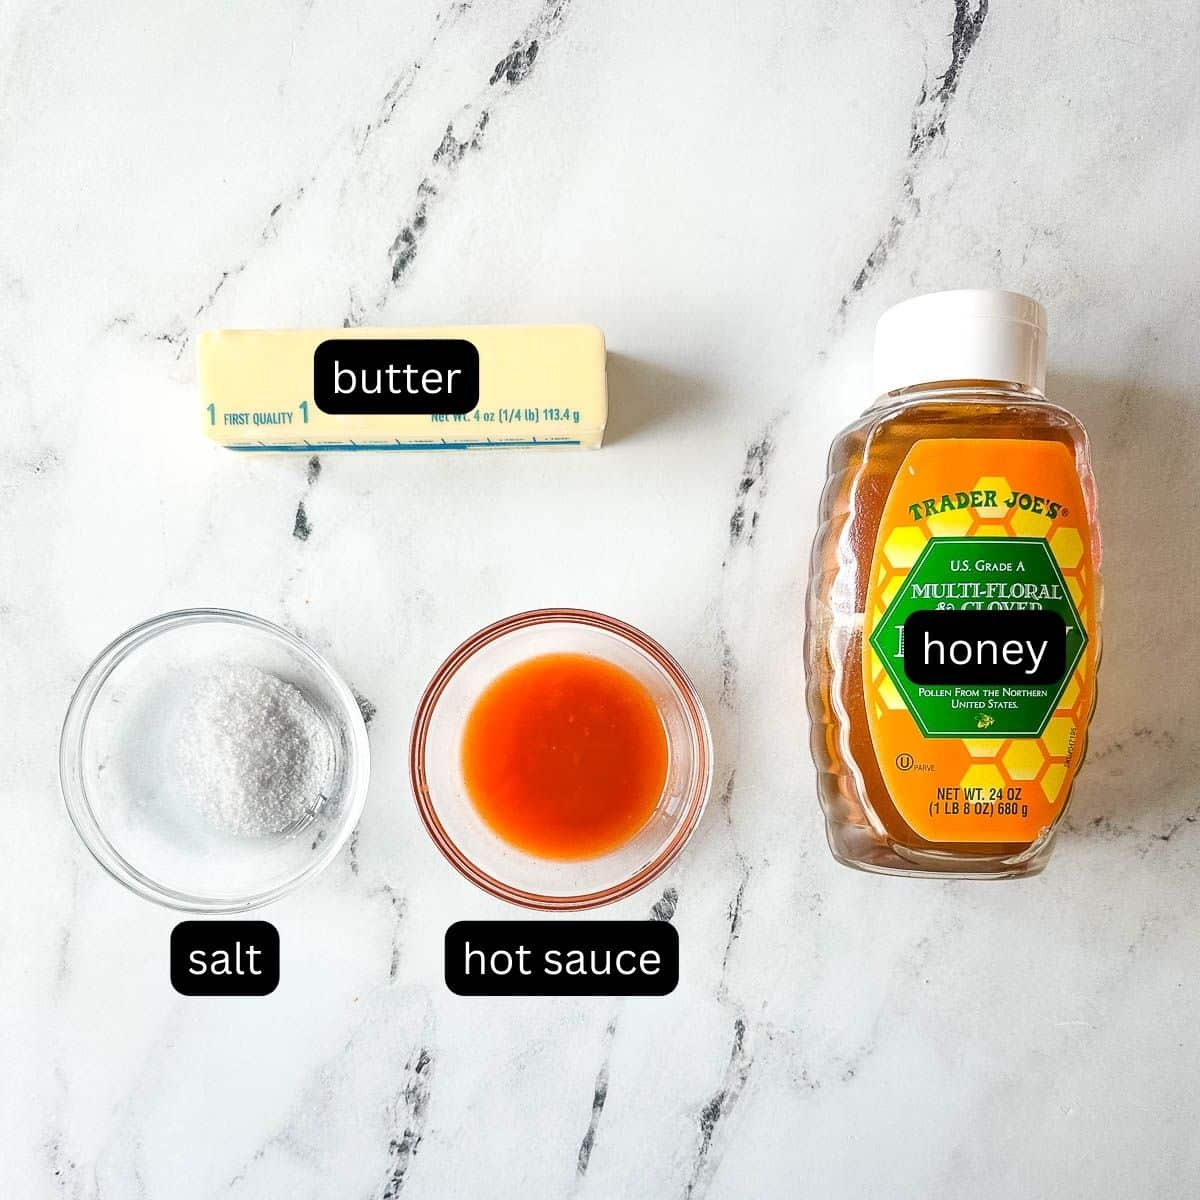 Labeled ingredients for hot honey sauce on a white marble counter.